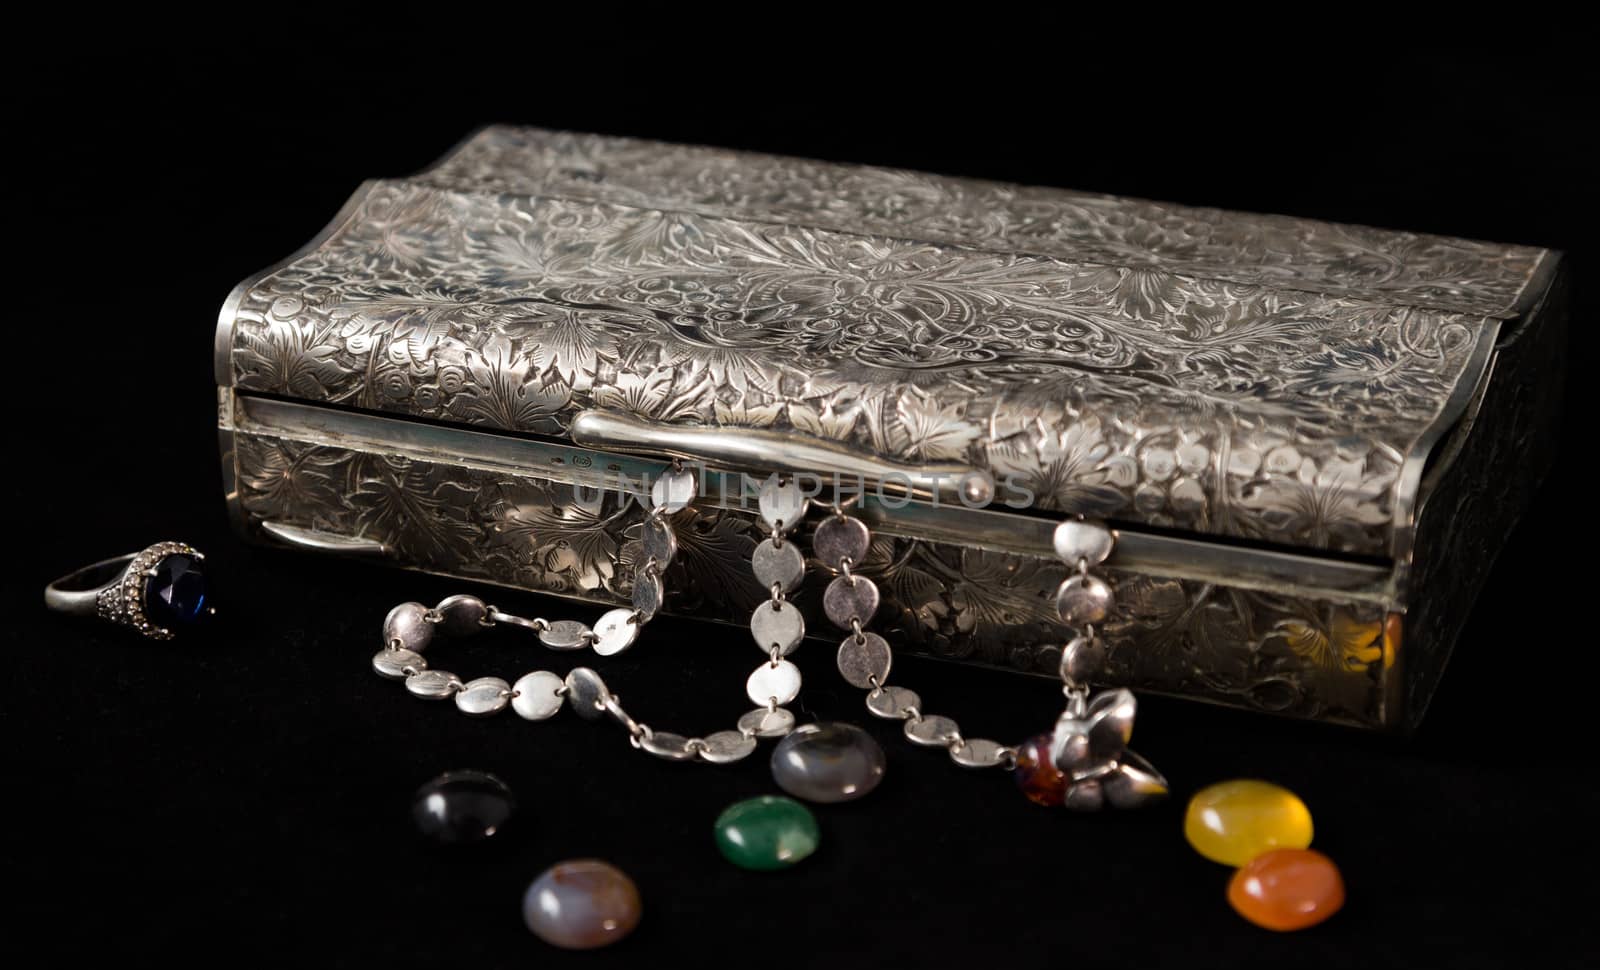 jewel box and precious stones by maurice_webster